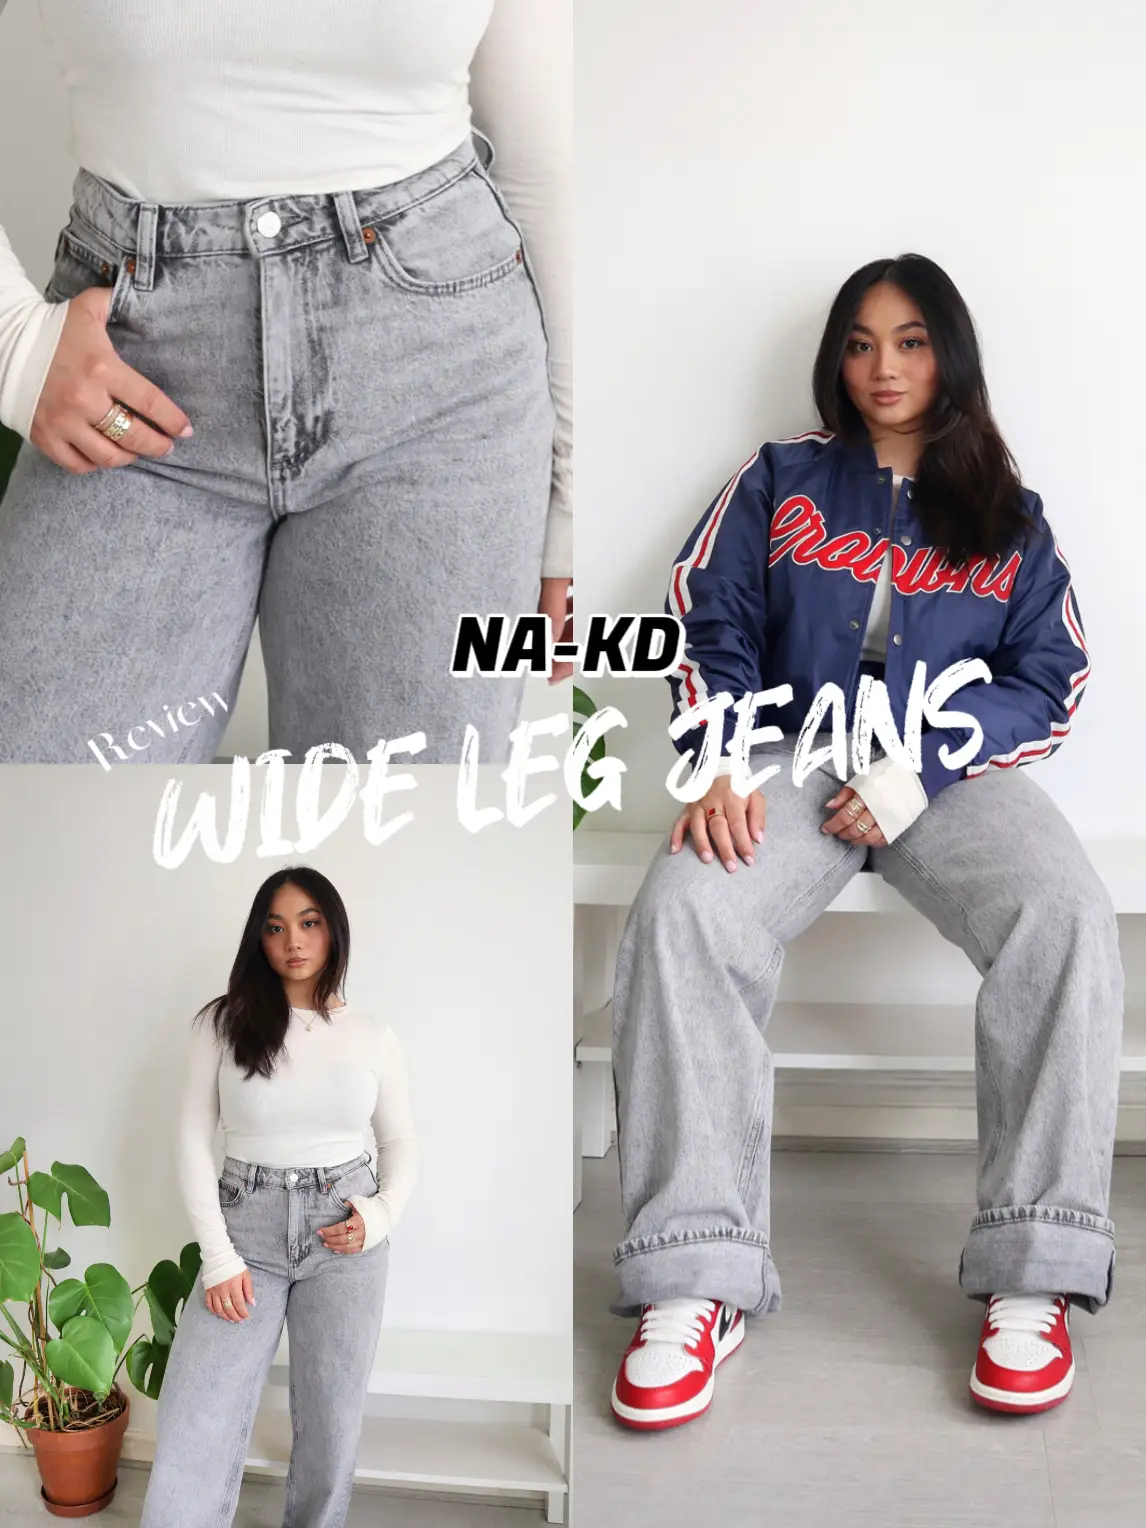 Na-kd Fashion: Wide Leg Jeans Review, Gallery posted by Kai Kho